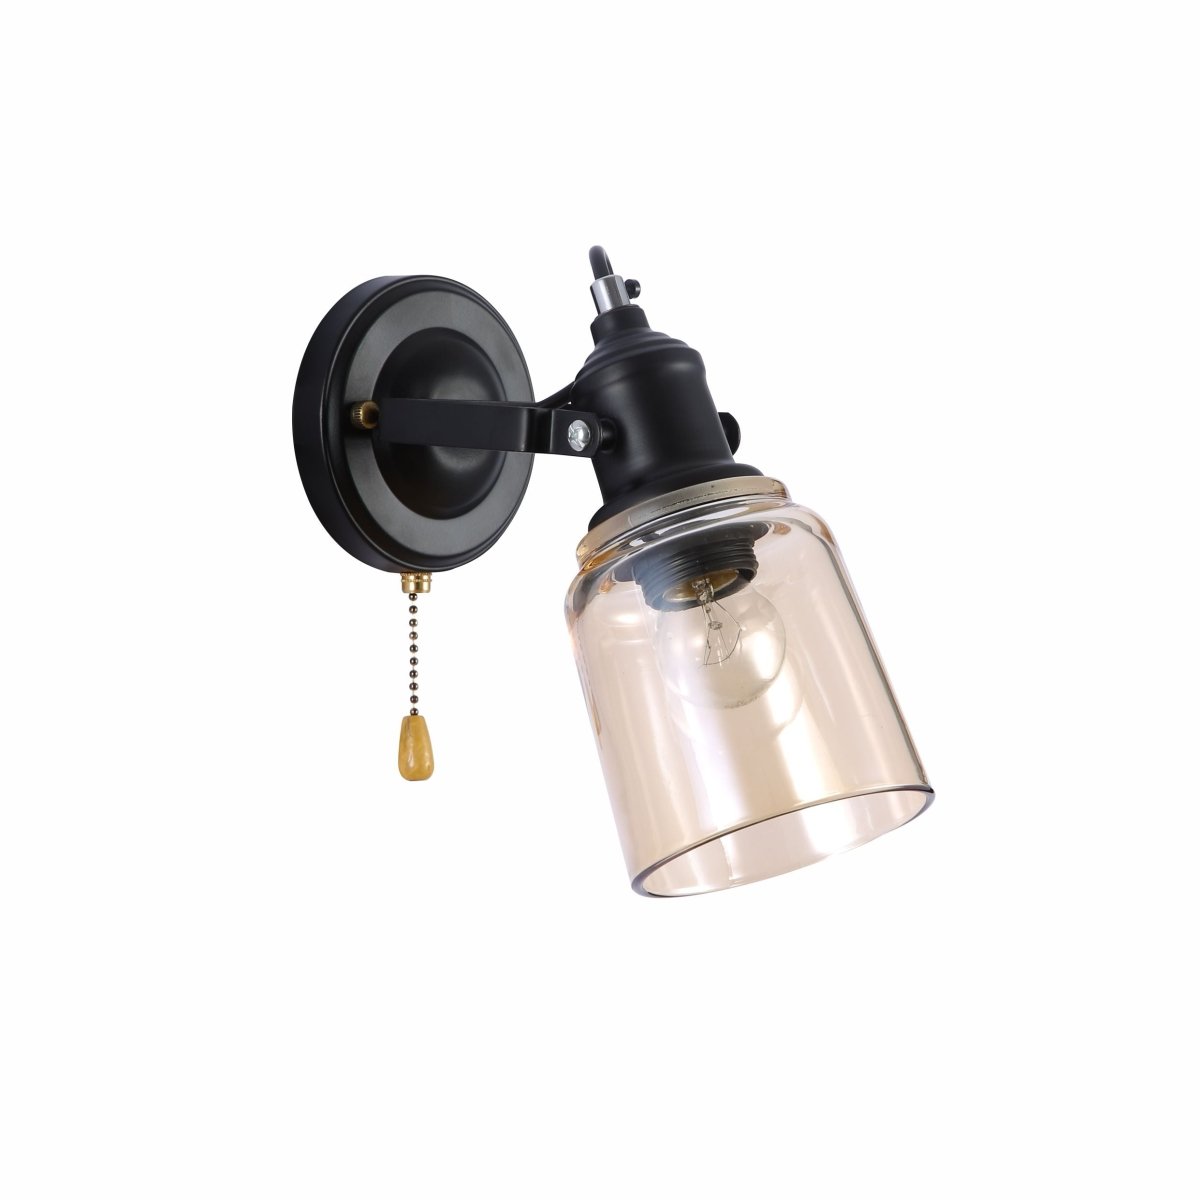 Amber Glass Cone Wall Light E27 And Pull Down Switch's main image.